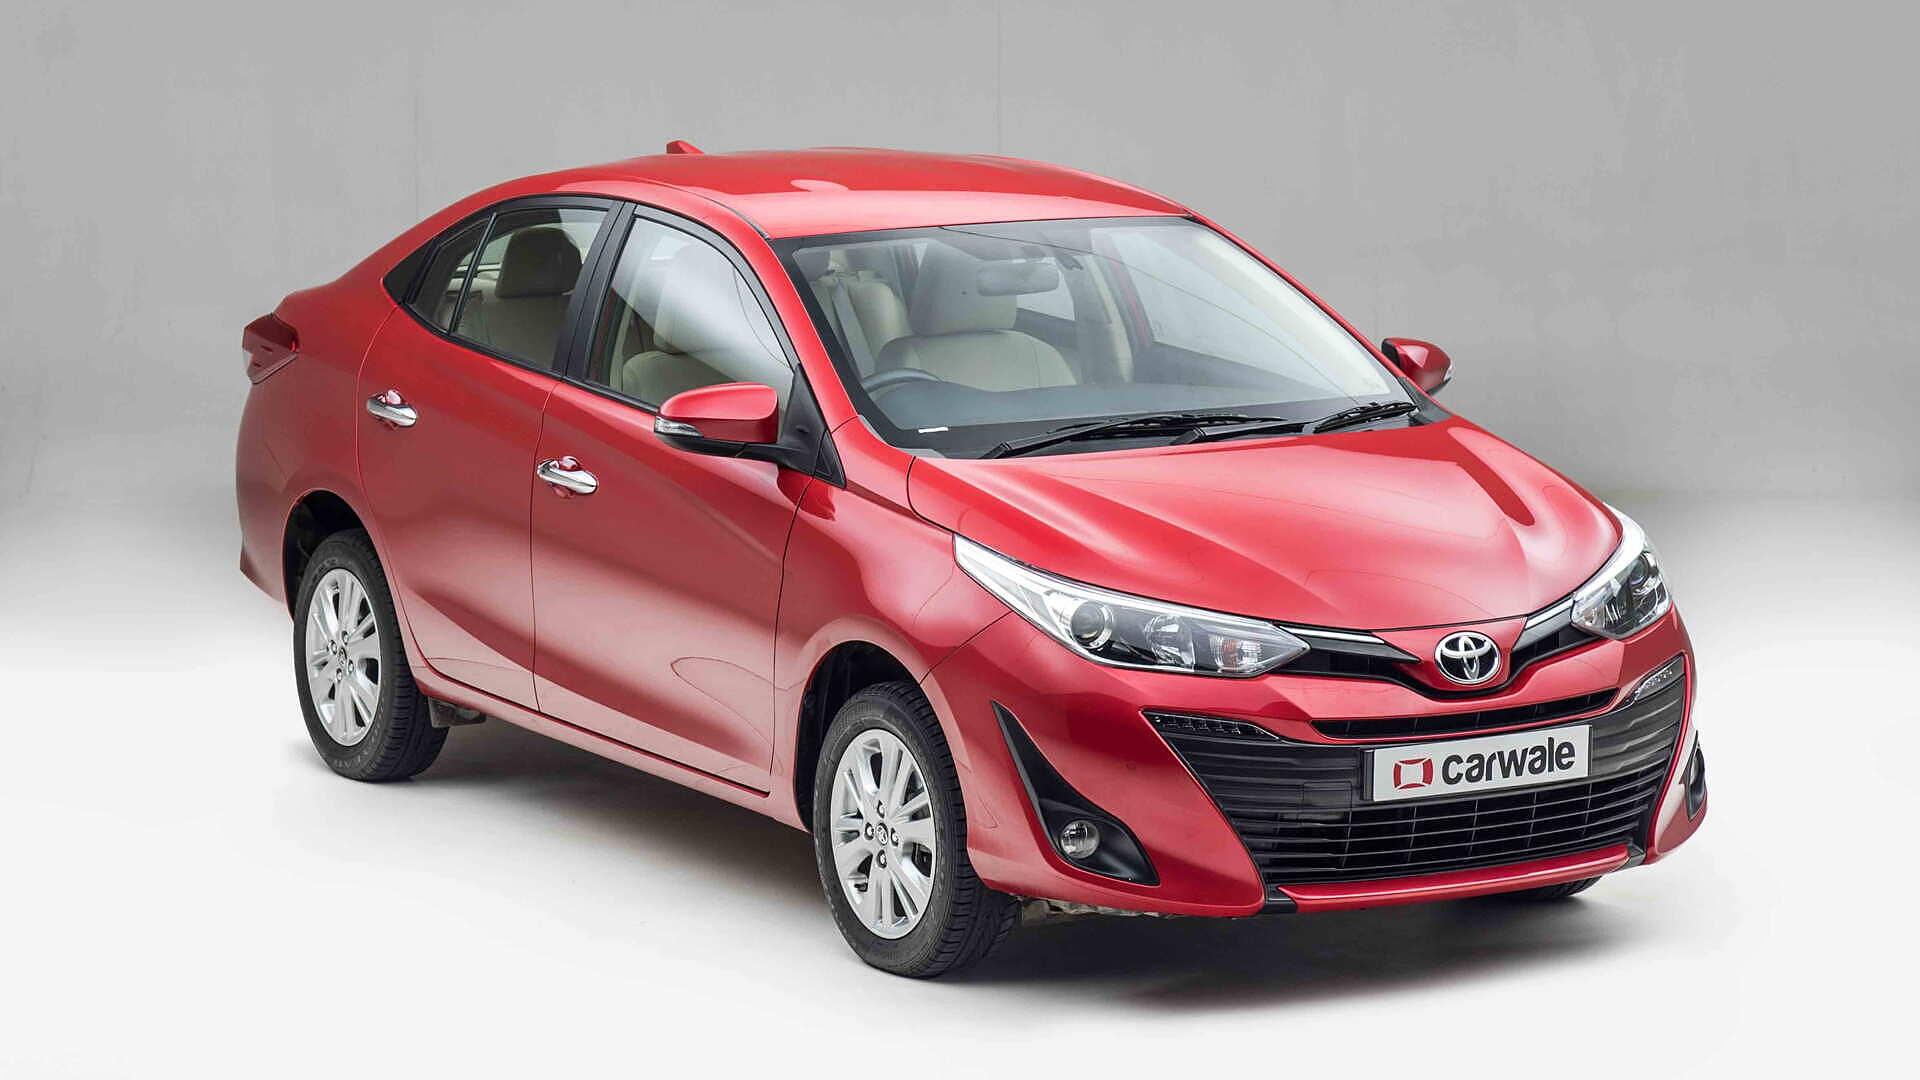 Toyota Yaris 2019 - Price in India, Mileage, Reviews, Colours,  Specification, Images - Overdrive